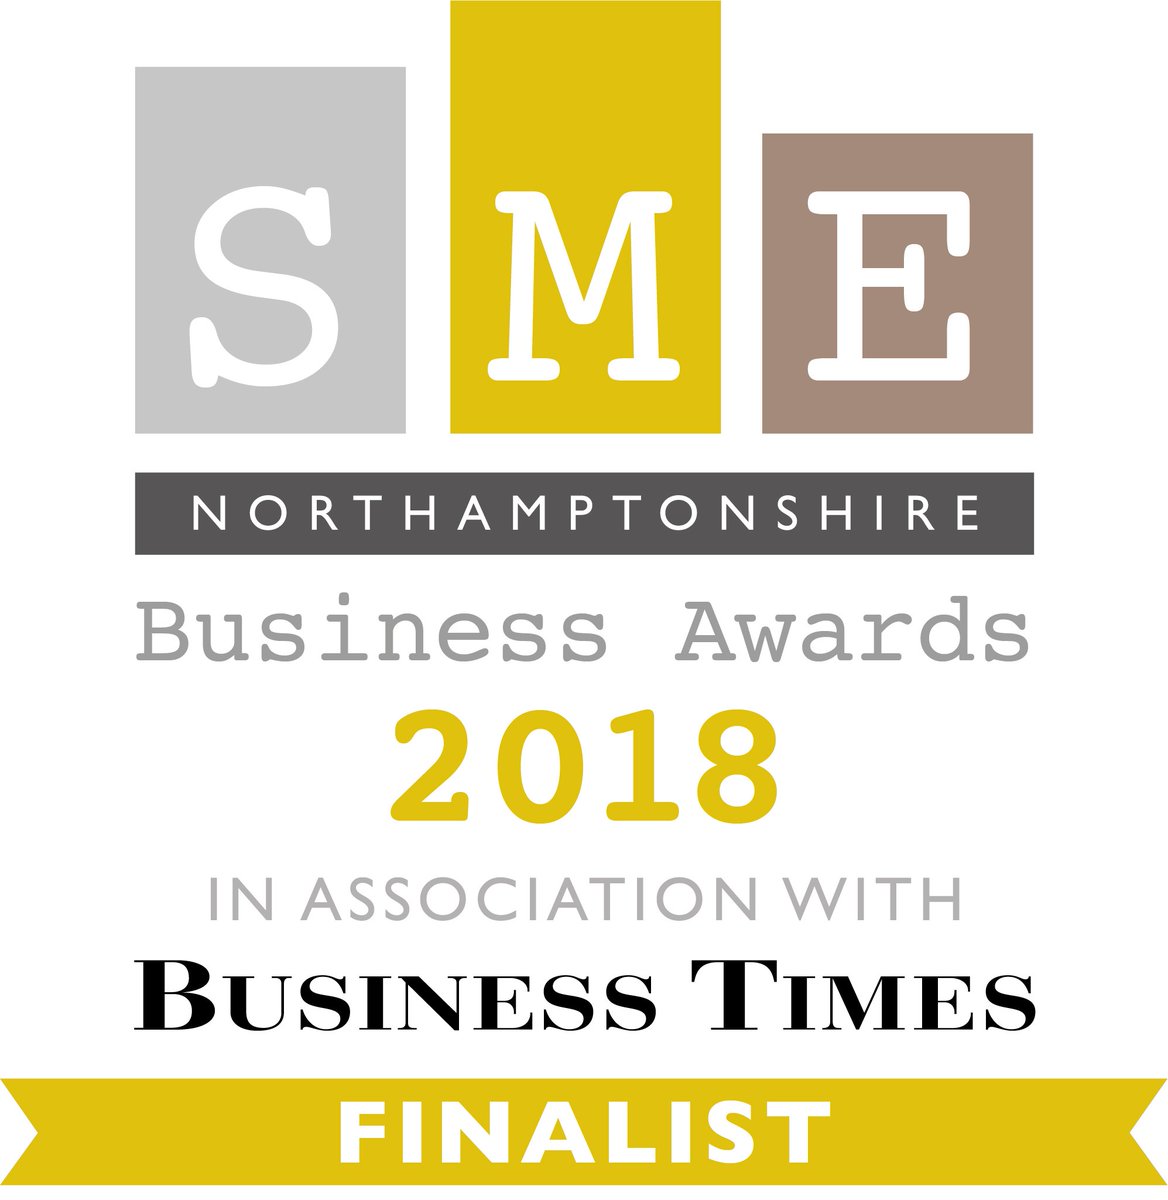 ****CONGRATULATIONS TO US****

We are a finalist in the SME Northamptonshire Business Awards for 'Employer of the Year'!  

It's easy to be a #greatemployer when you have the most #amazingemployees. High fives all round JPP!

#SMENorthants #employeroftheyear #TeamJPP